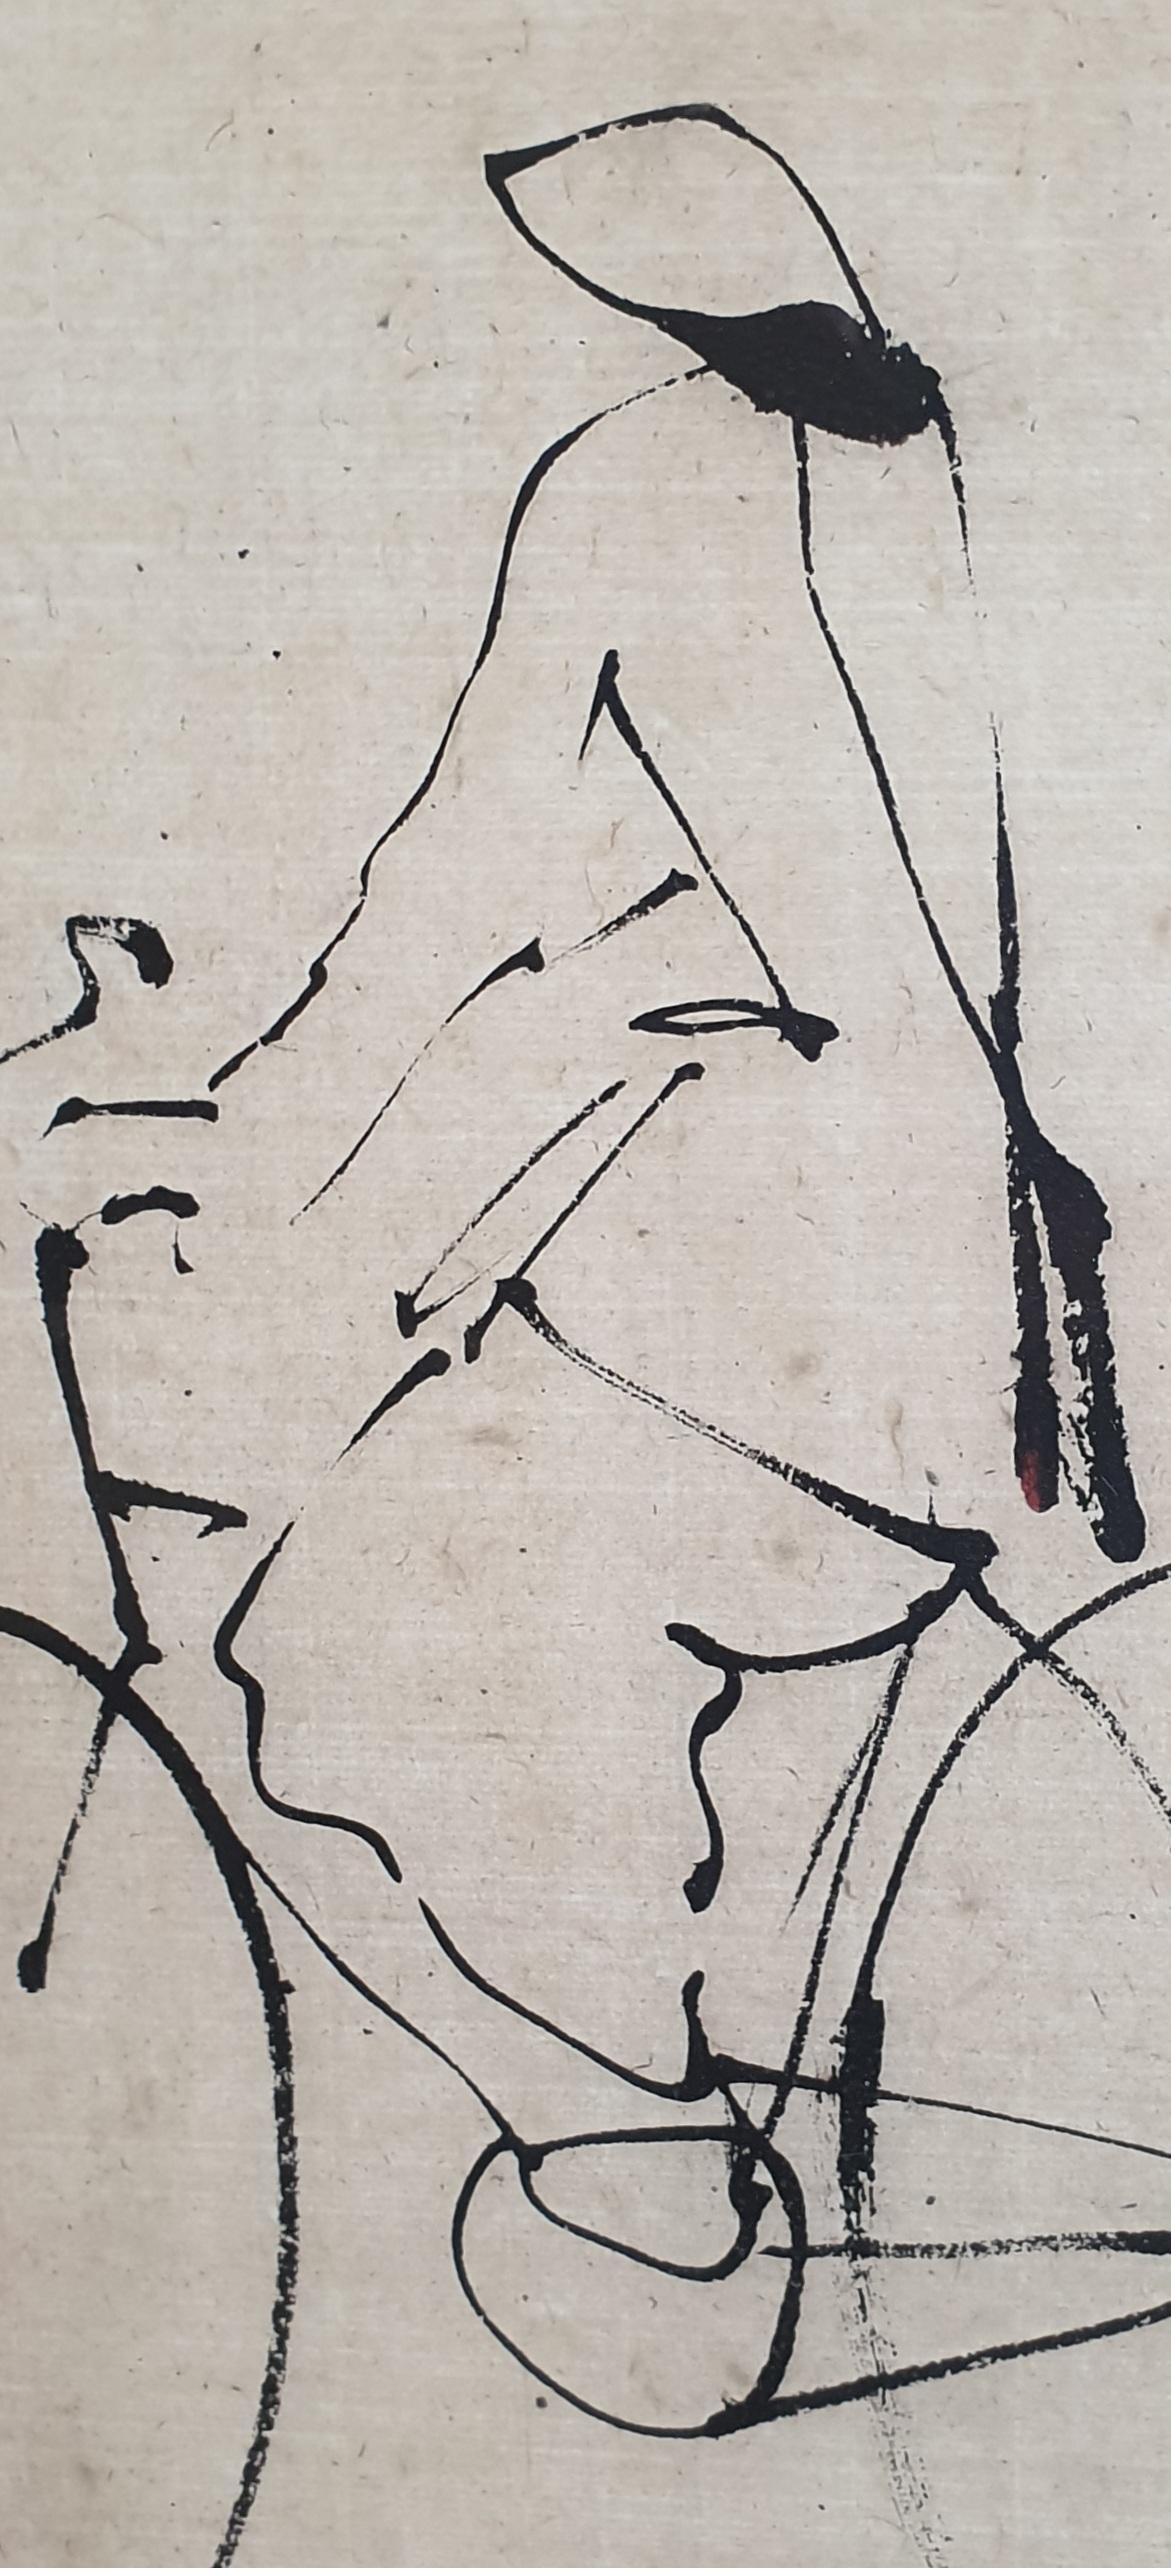 Ink on linen cloth line drawing of an Asian woman on a bicycle. Signed bottom right and presented in a carved bamboo style frame.

A charming example of how a few lines can say so much in this characterful, enchanting picture. With only a few expert